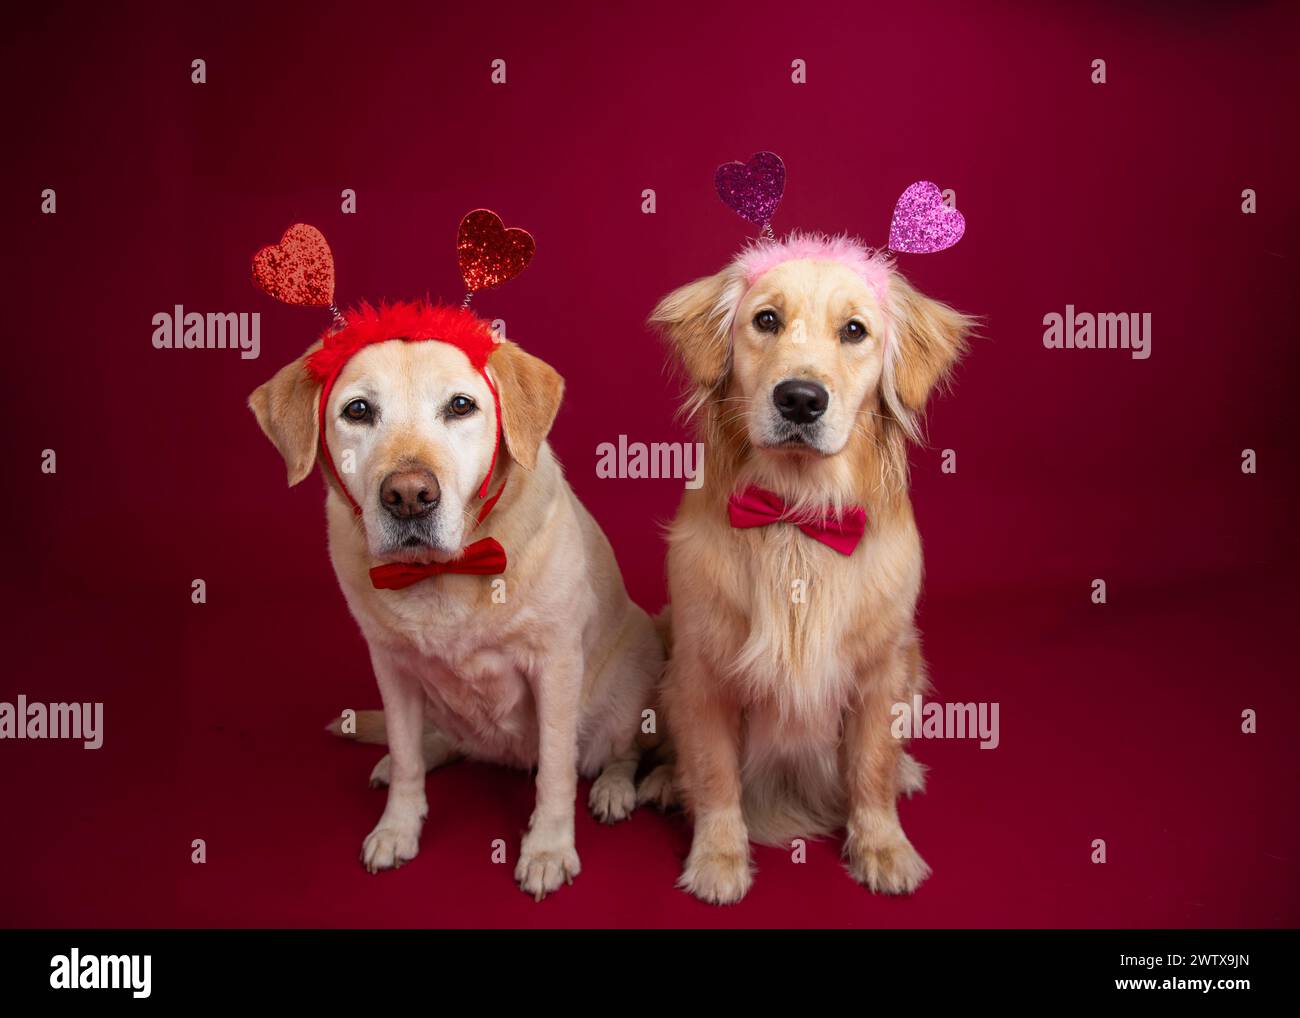 Golden Retriever and a Yellow Labrador Retriever wearing bow ties and hair bands with hearts sitting side by side Stock Photo